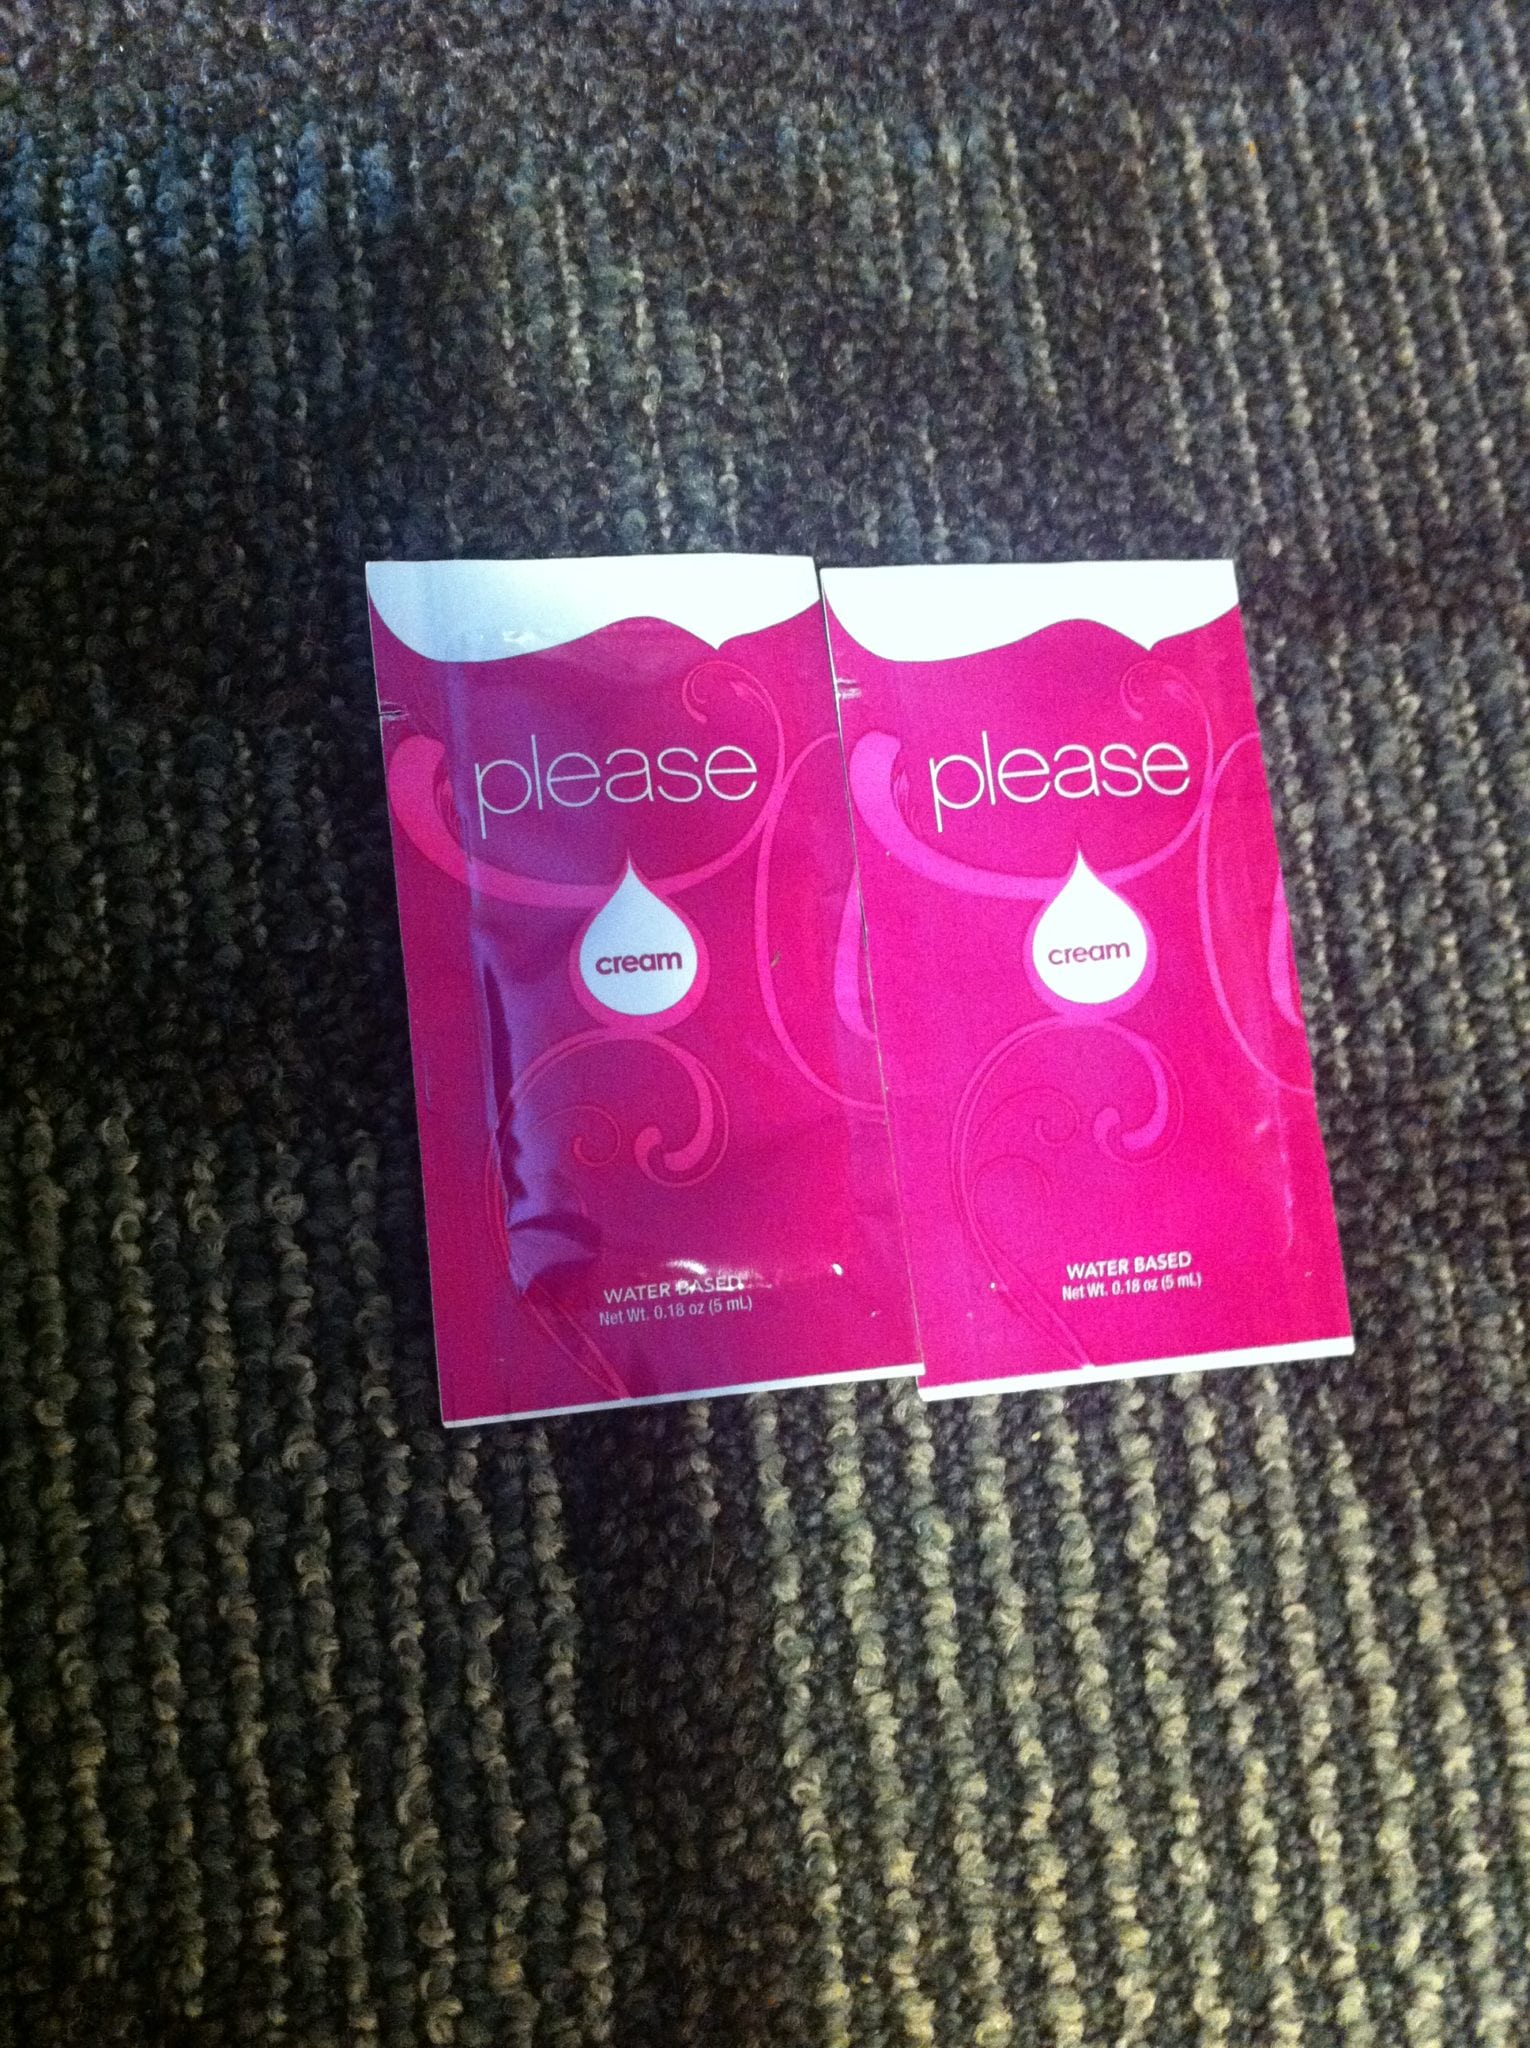 Please Cream Lubricant Review